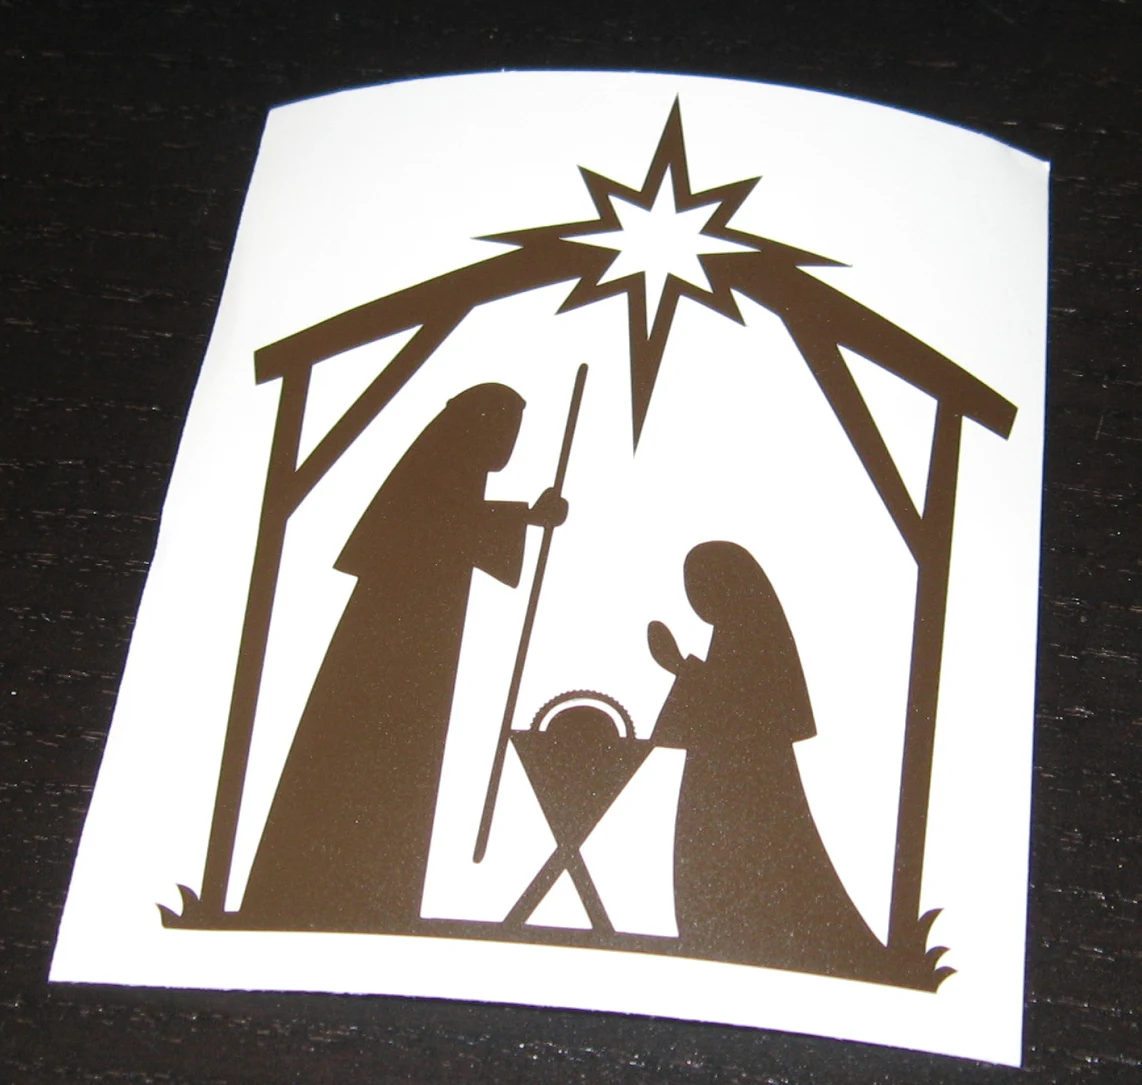 Search Results for “Printable Nativity Scene Silhouette Pattern